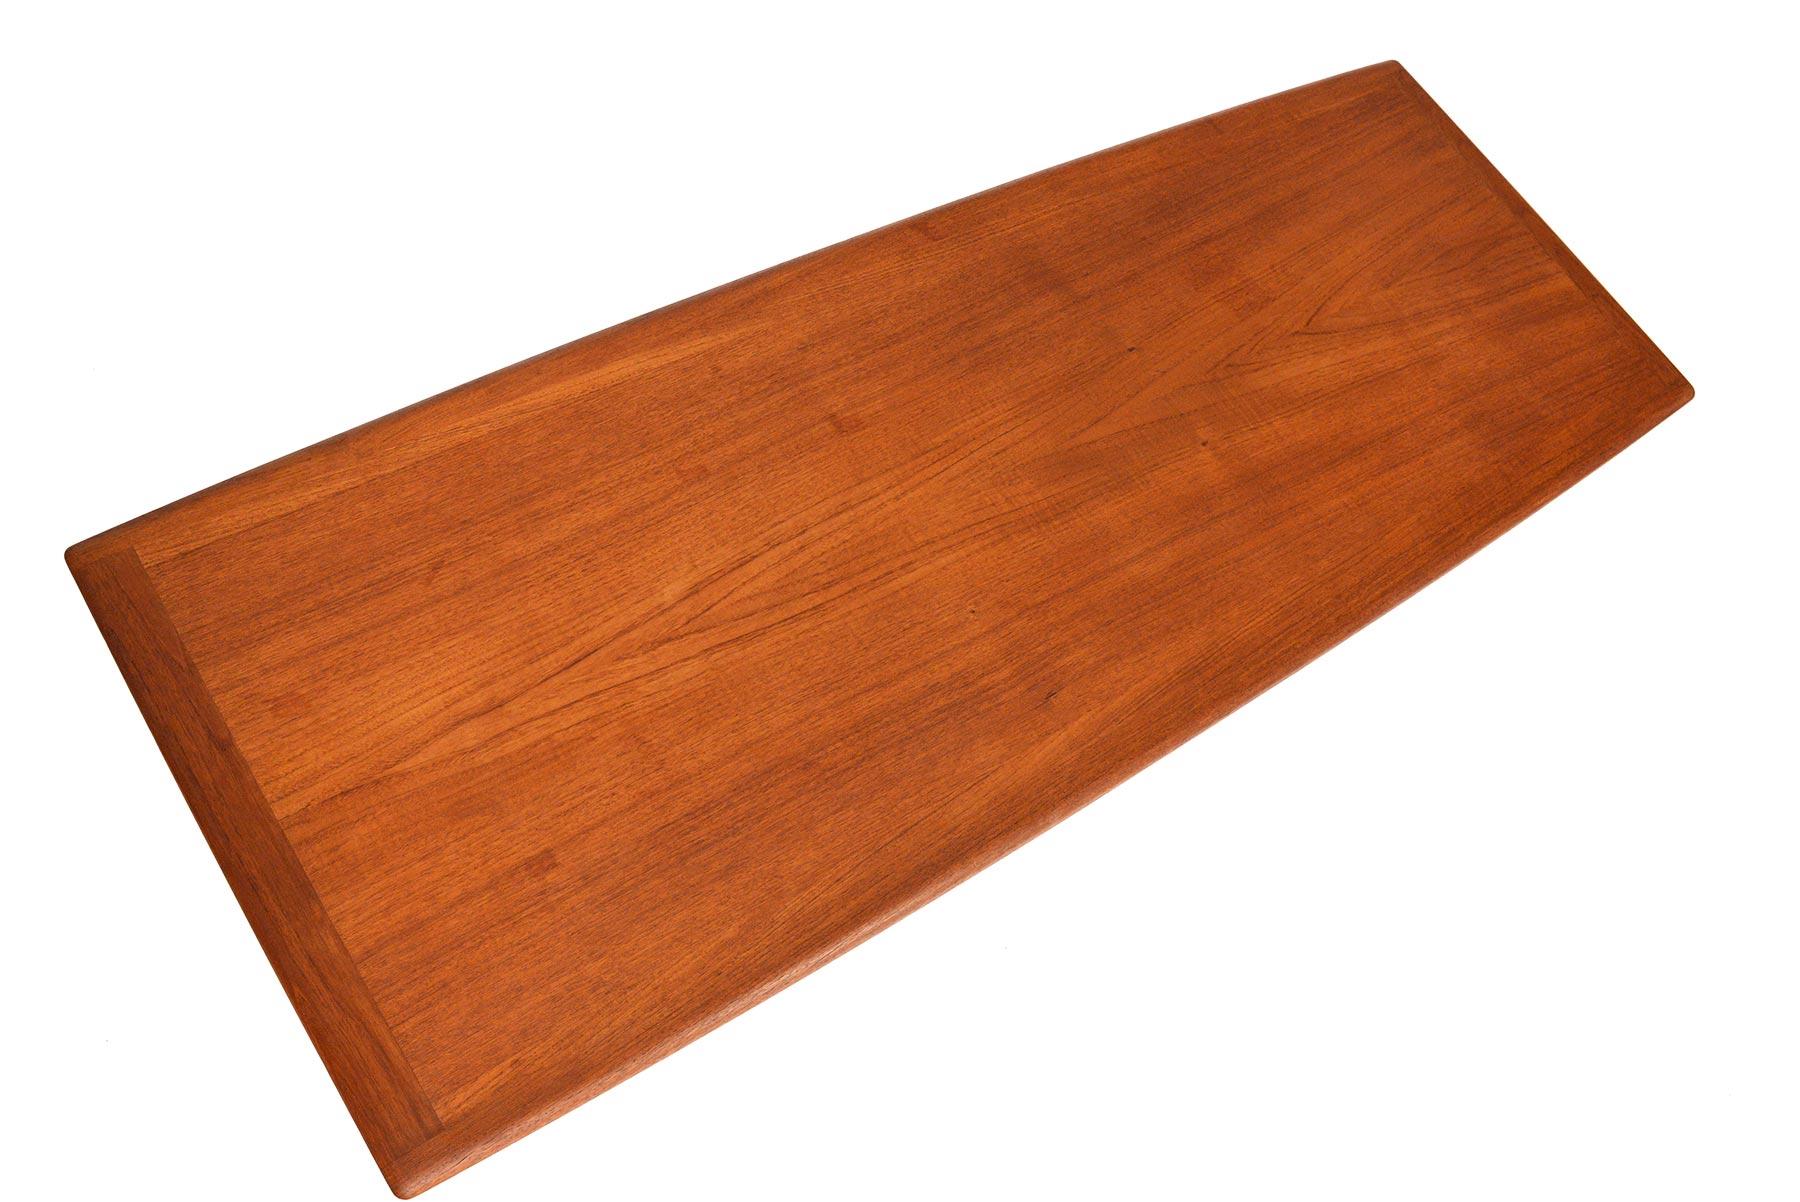 A staple of Scandinavian design, this teak surfboard coffee table was designed by Grete Jalk for Glostrup Møbelfabrik in the 1960s. A large teak table surface features a curved lip on the underside. A slatted rack sits below for storage. In